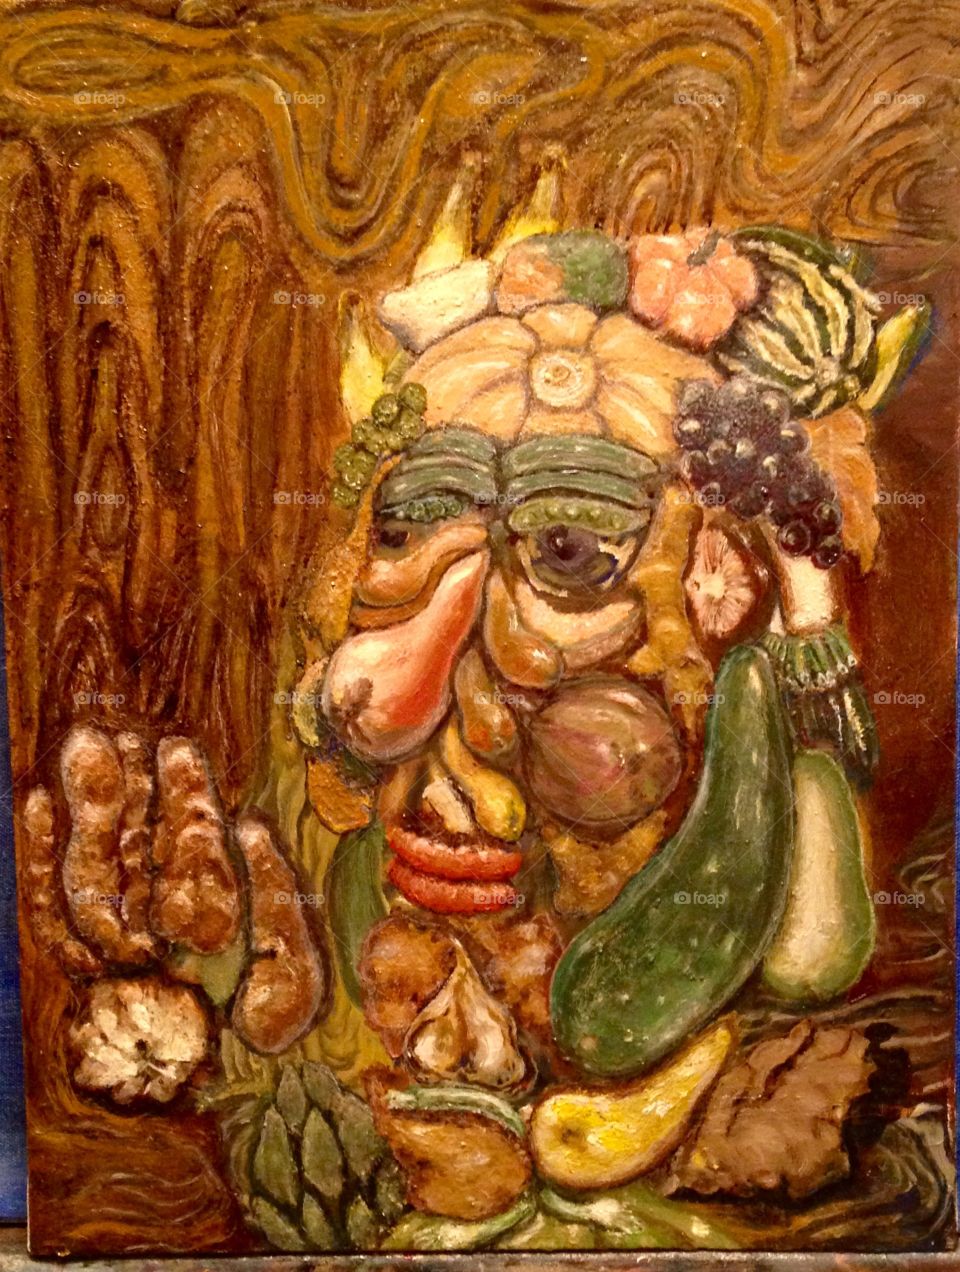 Painting of fruit n vegetables personification 